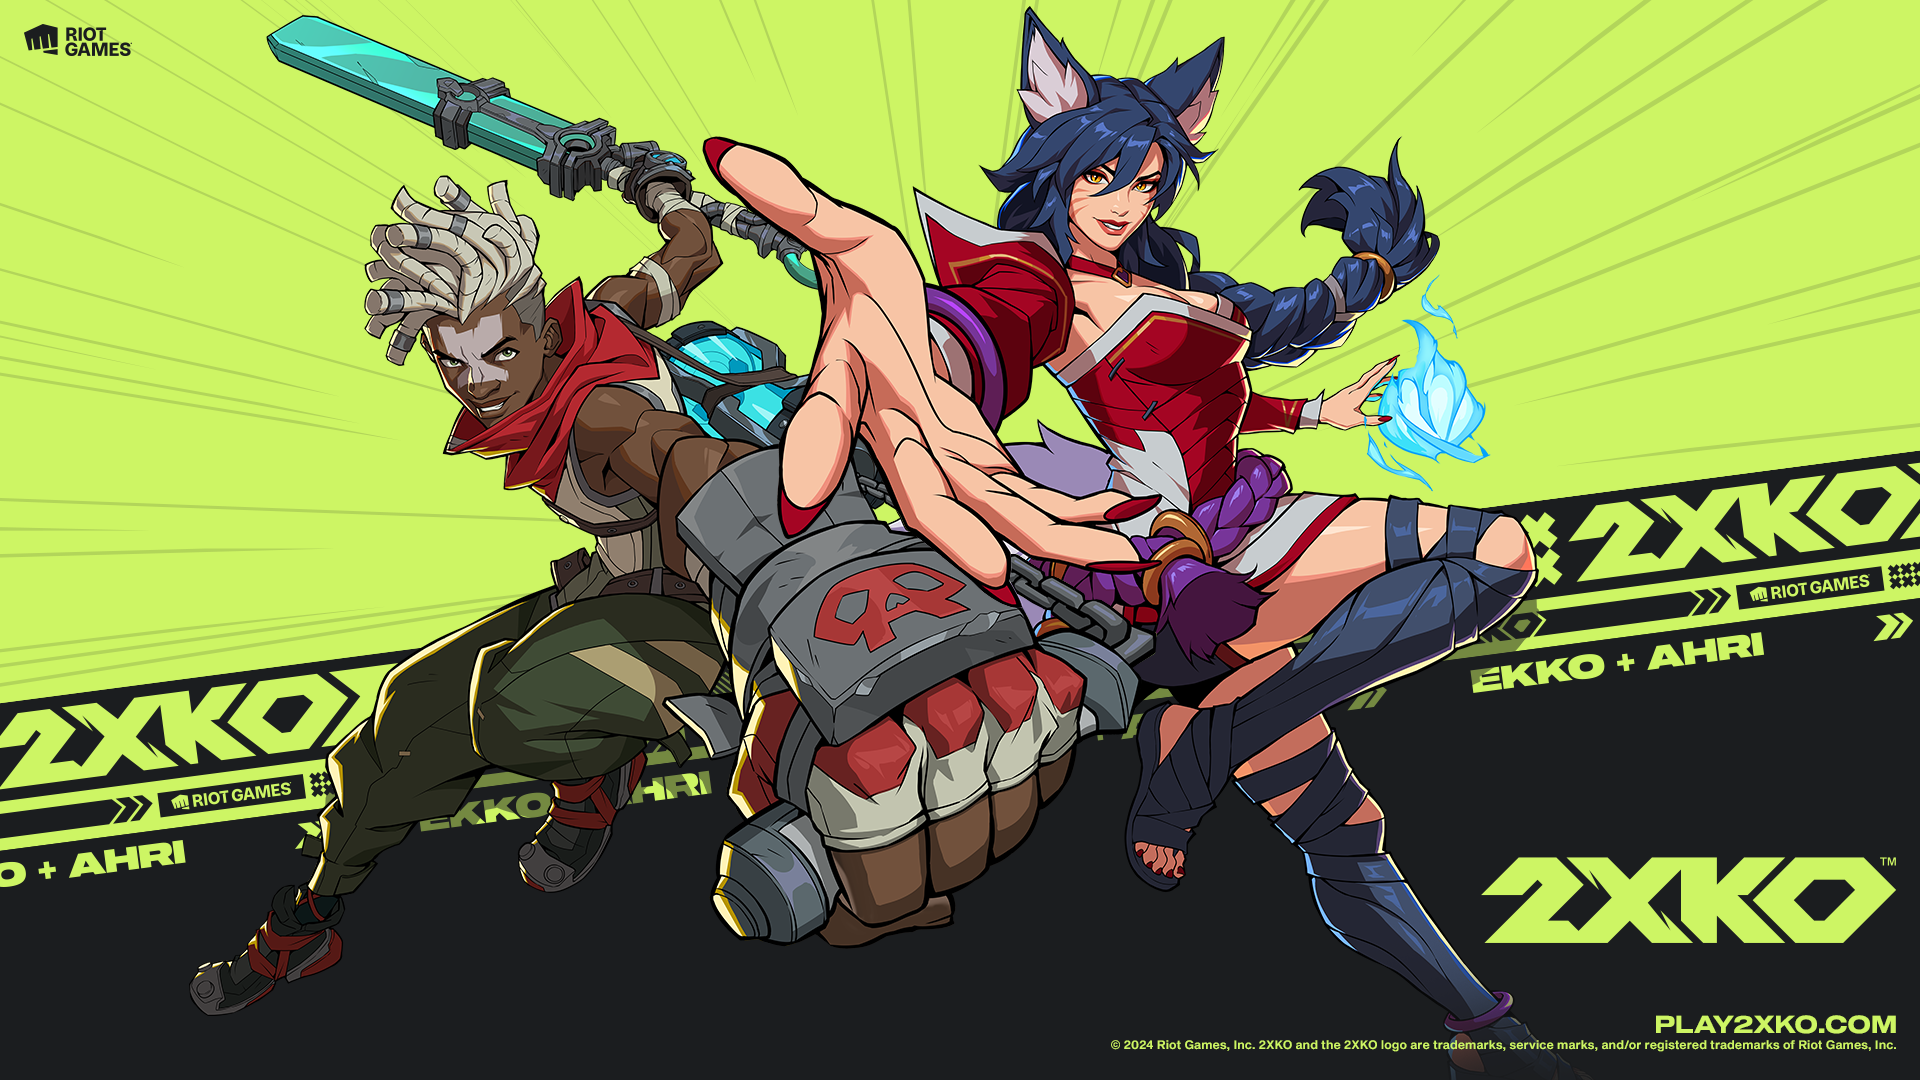 Key art for Riot Games’ fighting game 2XKO, showing Ekko and Ahri from League of Legends posing in a dynamic way.